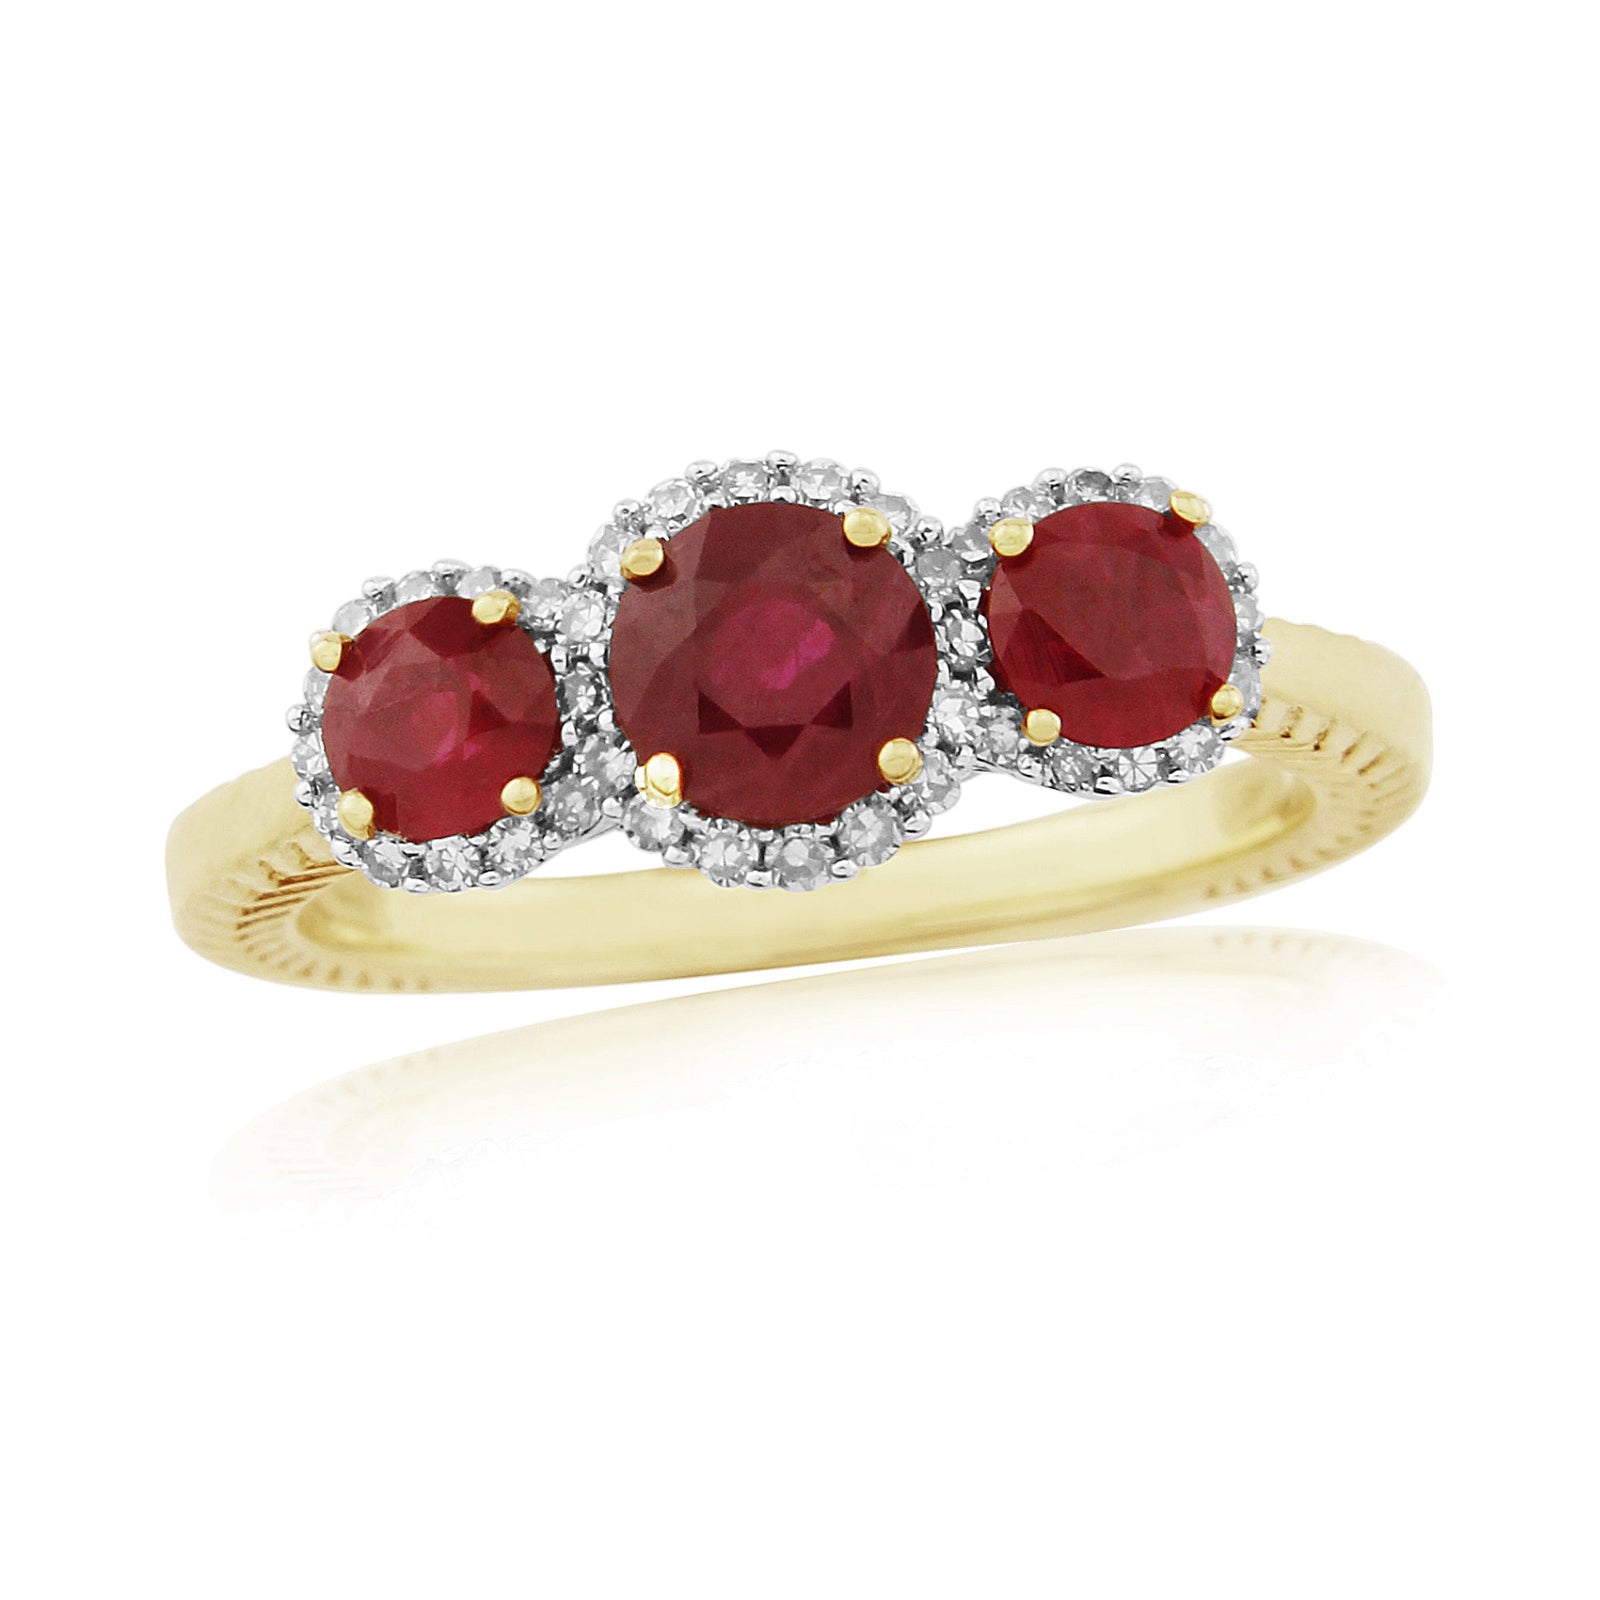 9ct gold triple 5mm & 4mm round ruby & diamond cluster ring 0.17ct